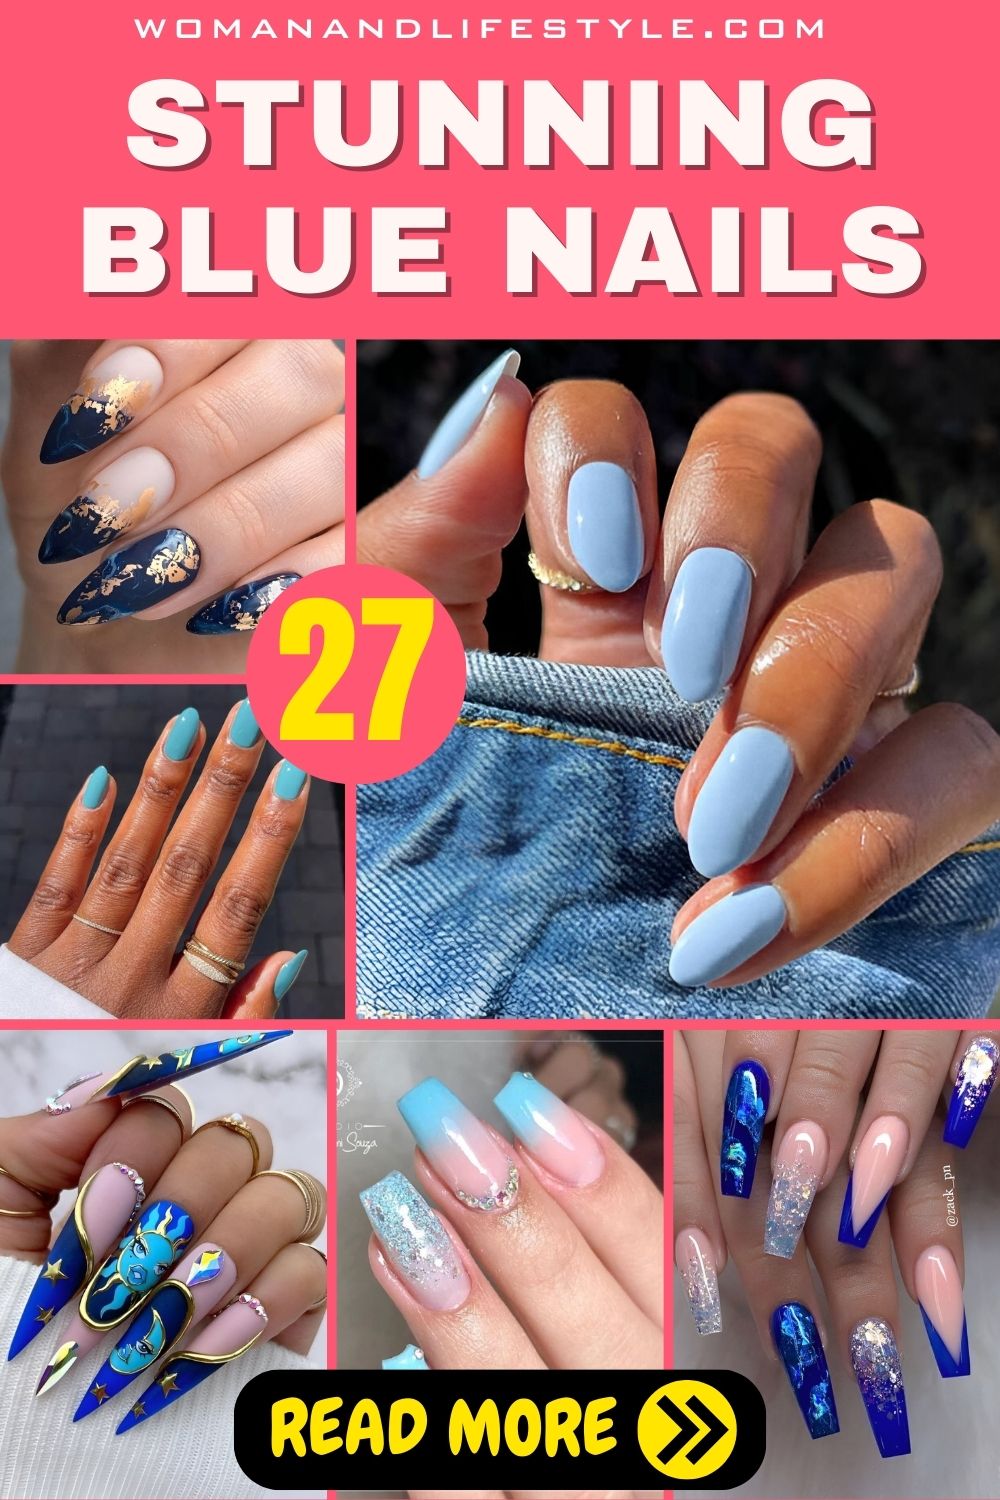 27 Stunning Blue Nails To Inspire Your Future Mani Makeover - Beauty ...